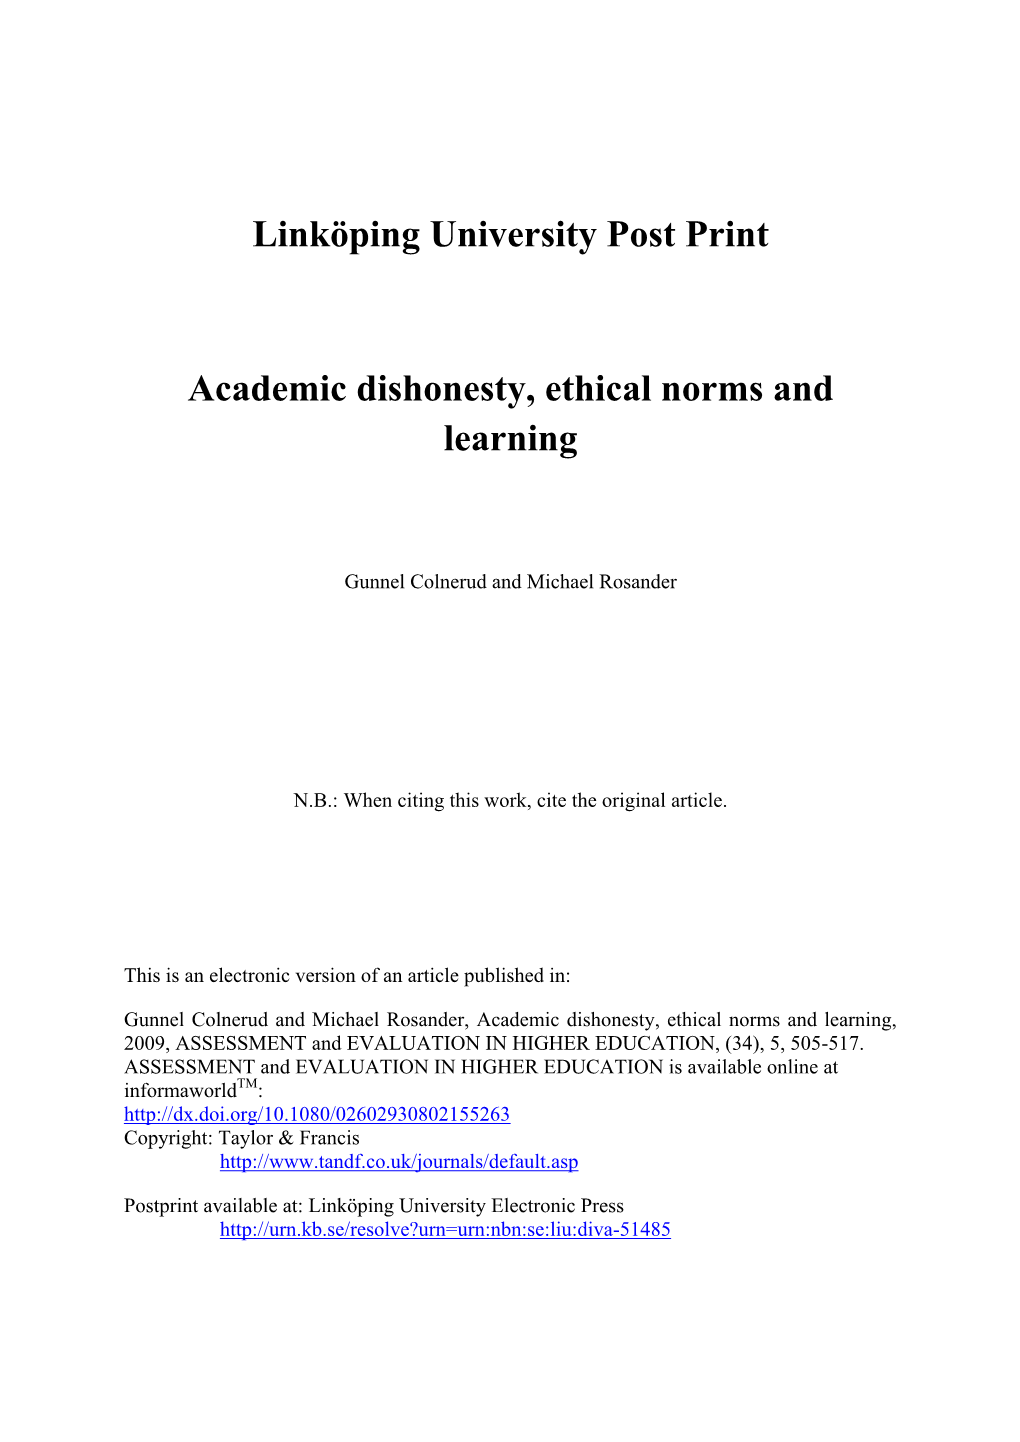 Academic Dishonesty, Ethical Norms and Learning